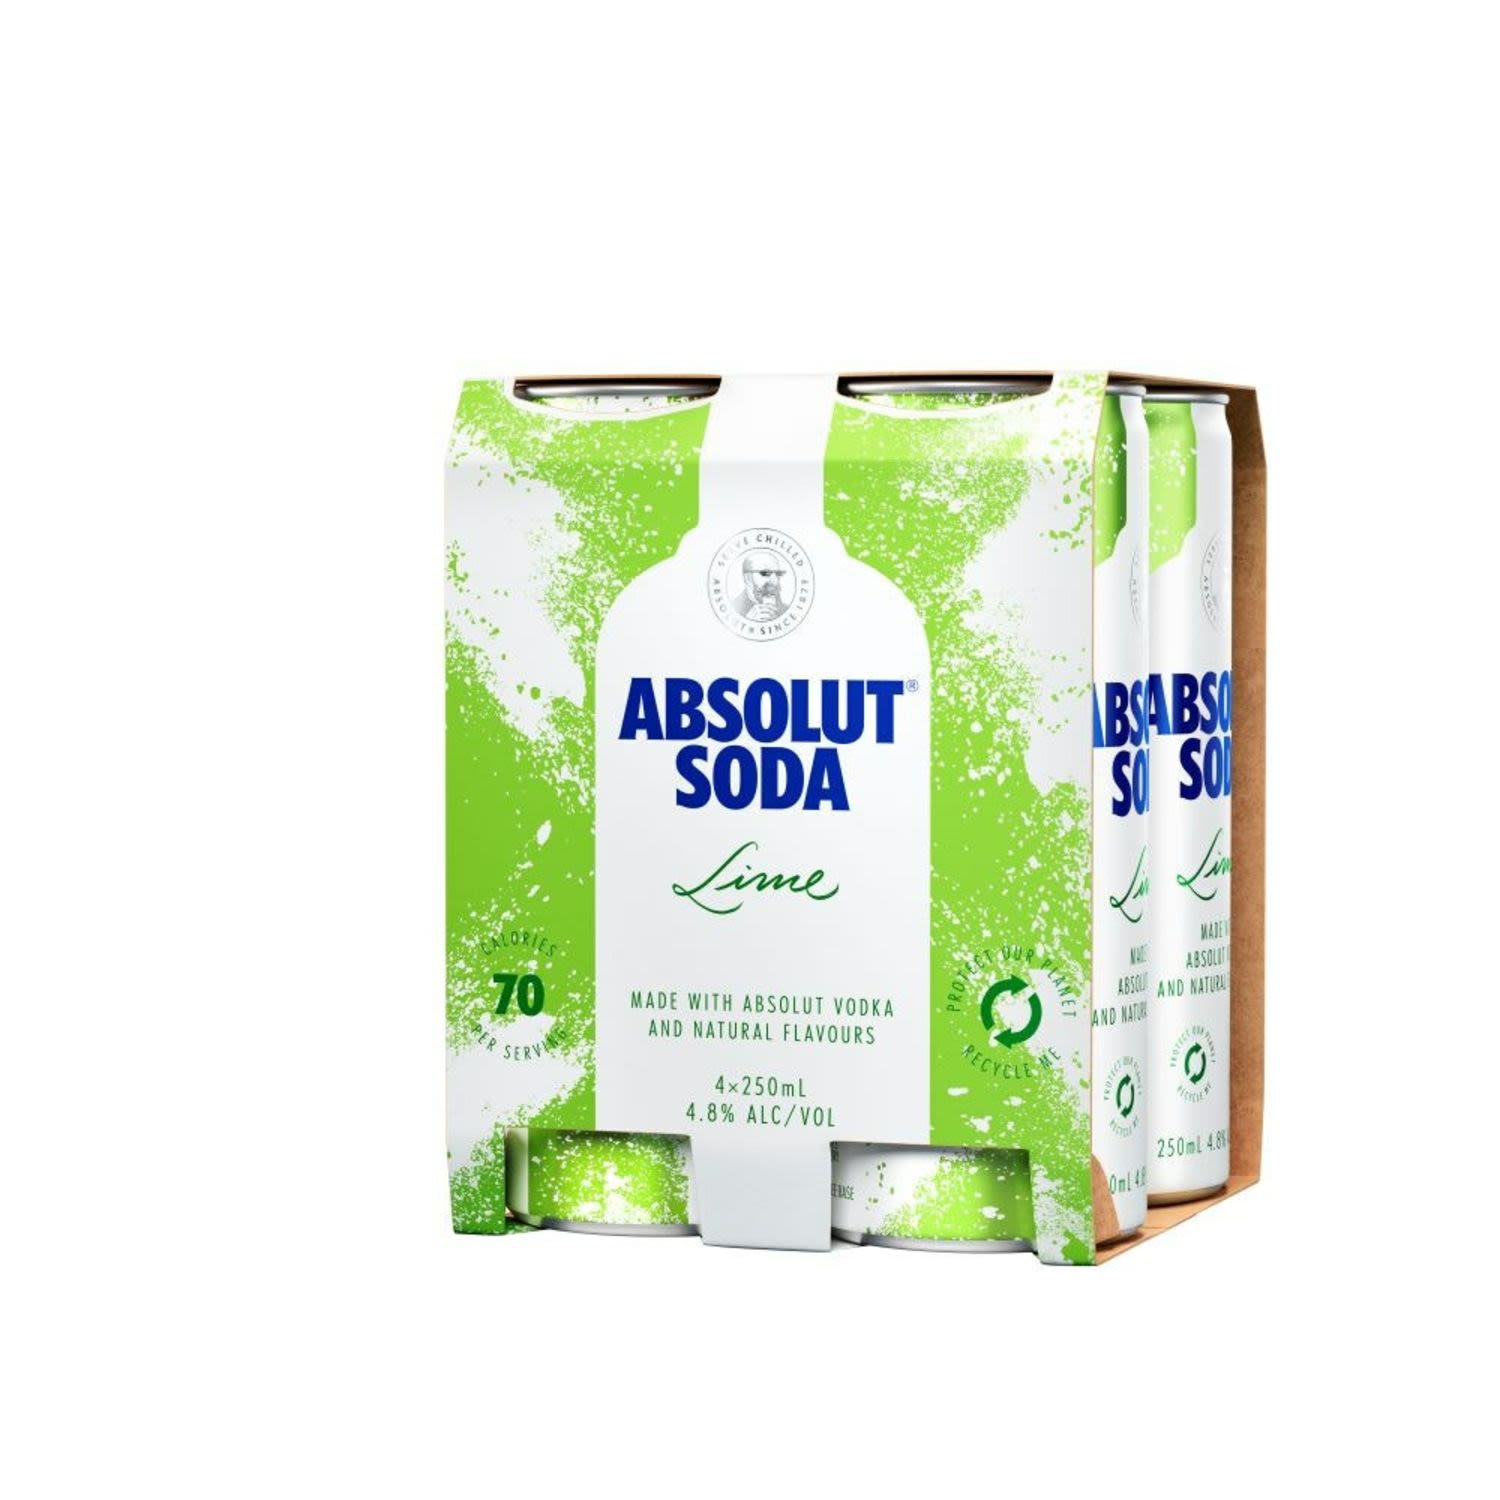 An enticingly fresh and zesty mix of limes & soda married perfectly with Absolut Vodka.<br /> <br />Alcohol Volume: 4.80%<br /><br />Pack Format: 4 Pack<br /><br />Standard Drinks: 0.9</br /><br />Pack Type: Can<br />